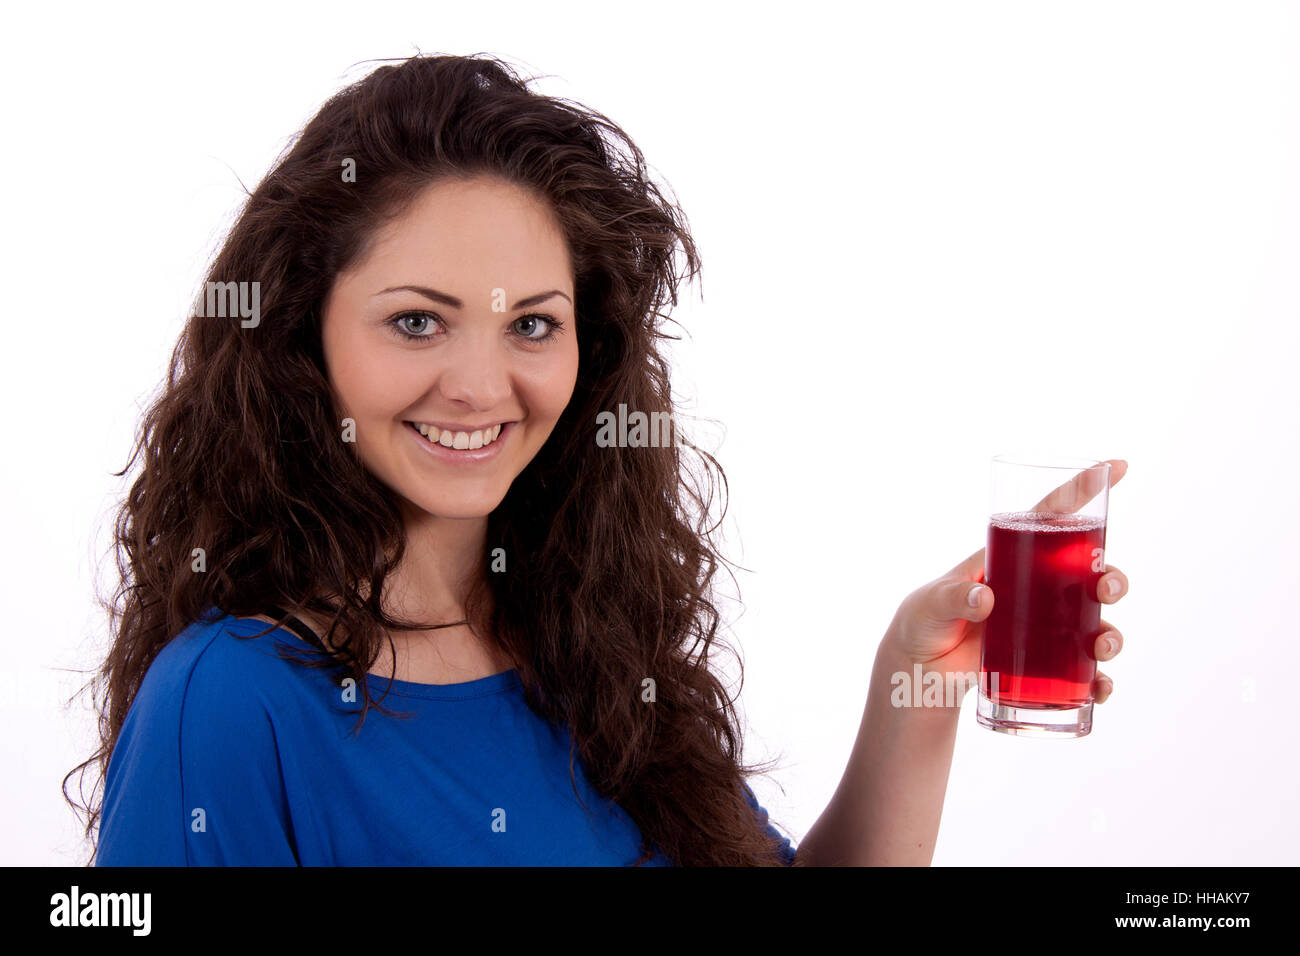 young beautiful woman drinking red juice Stock Photo